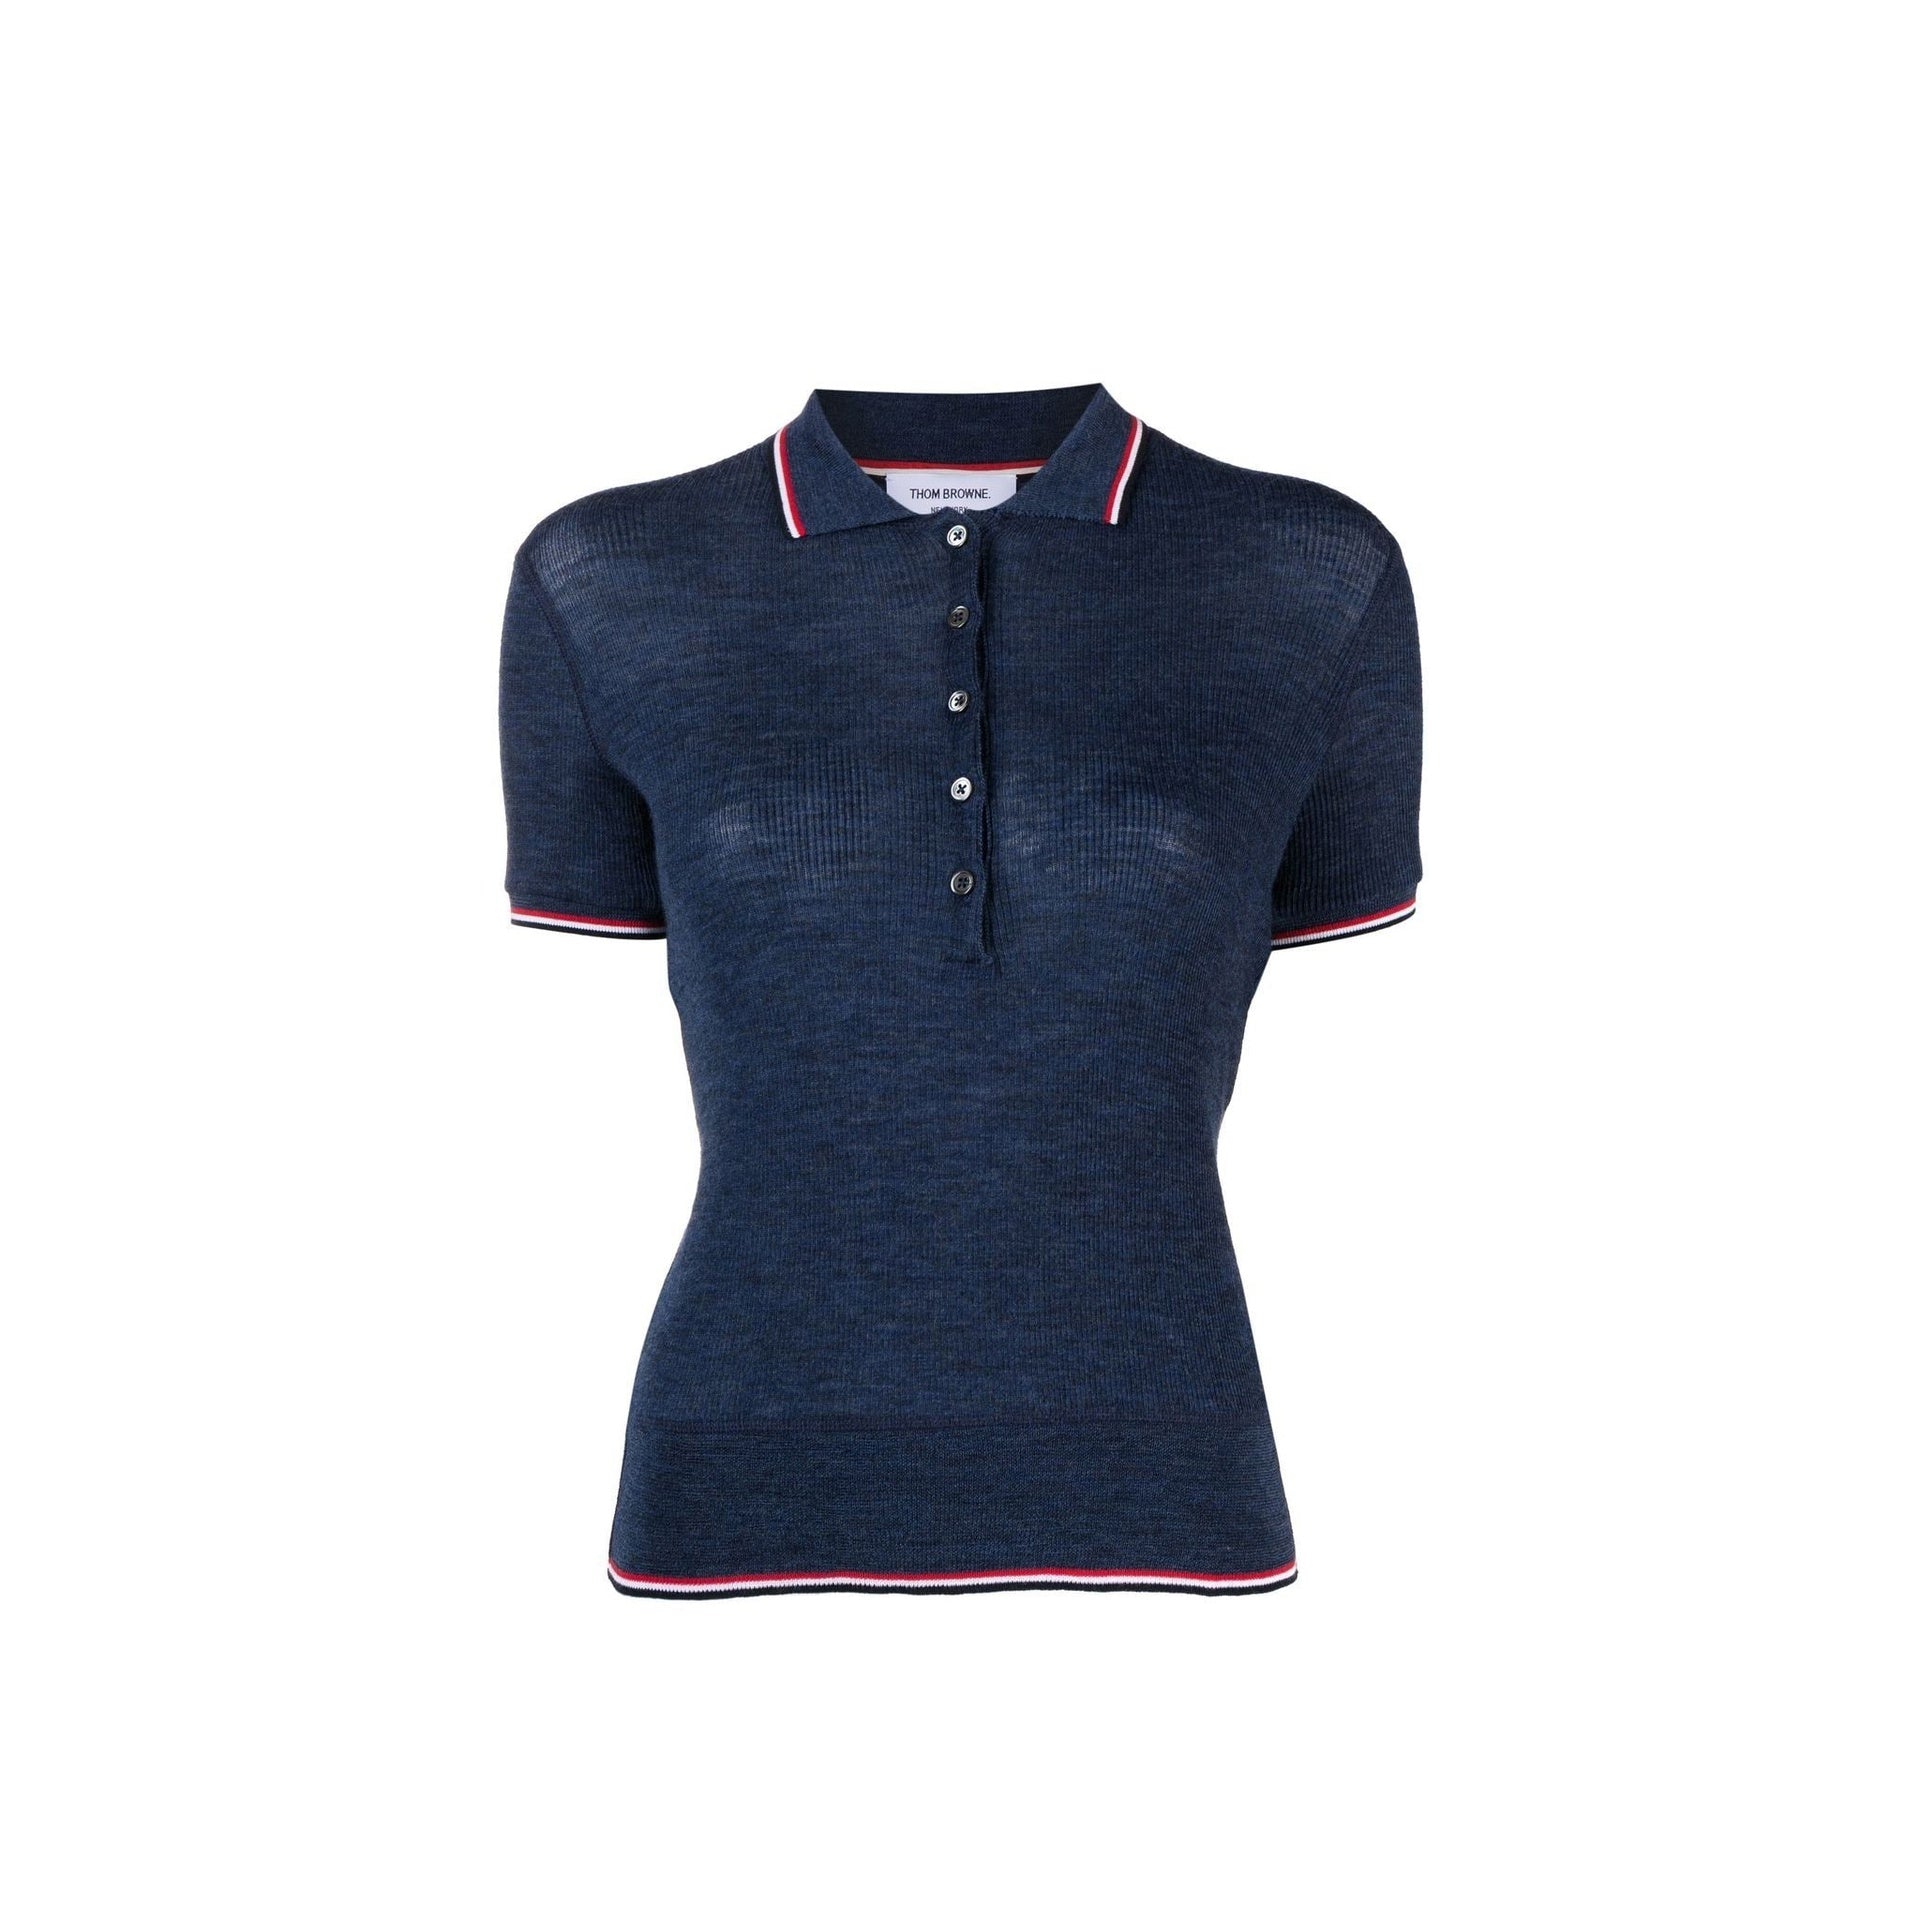 THOM-BROWNE-OUTLET-SALE-Thom-Browne-Polo-T-shirt-Shirts-BLUE-38-ARCHIVE-COLLECTION.jpg